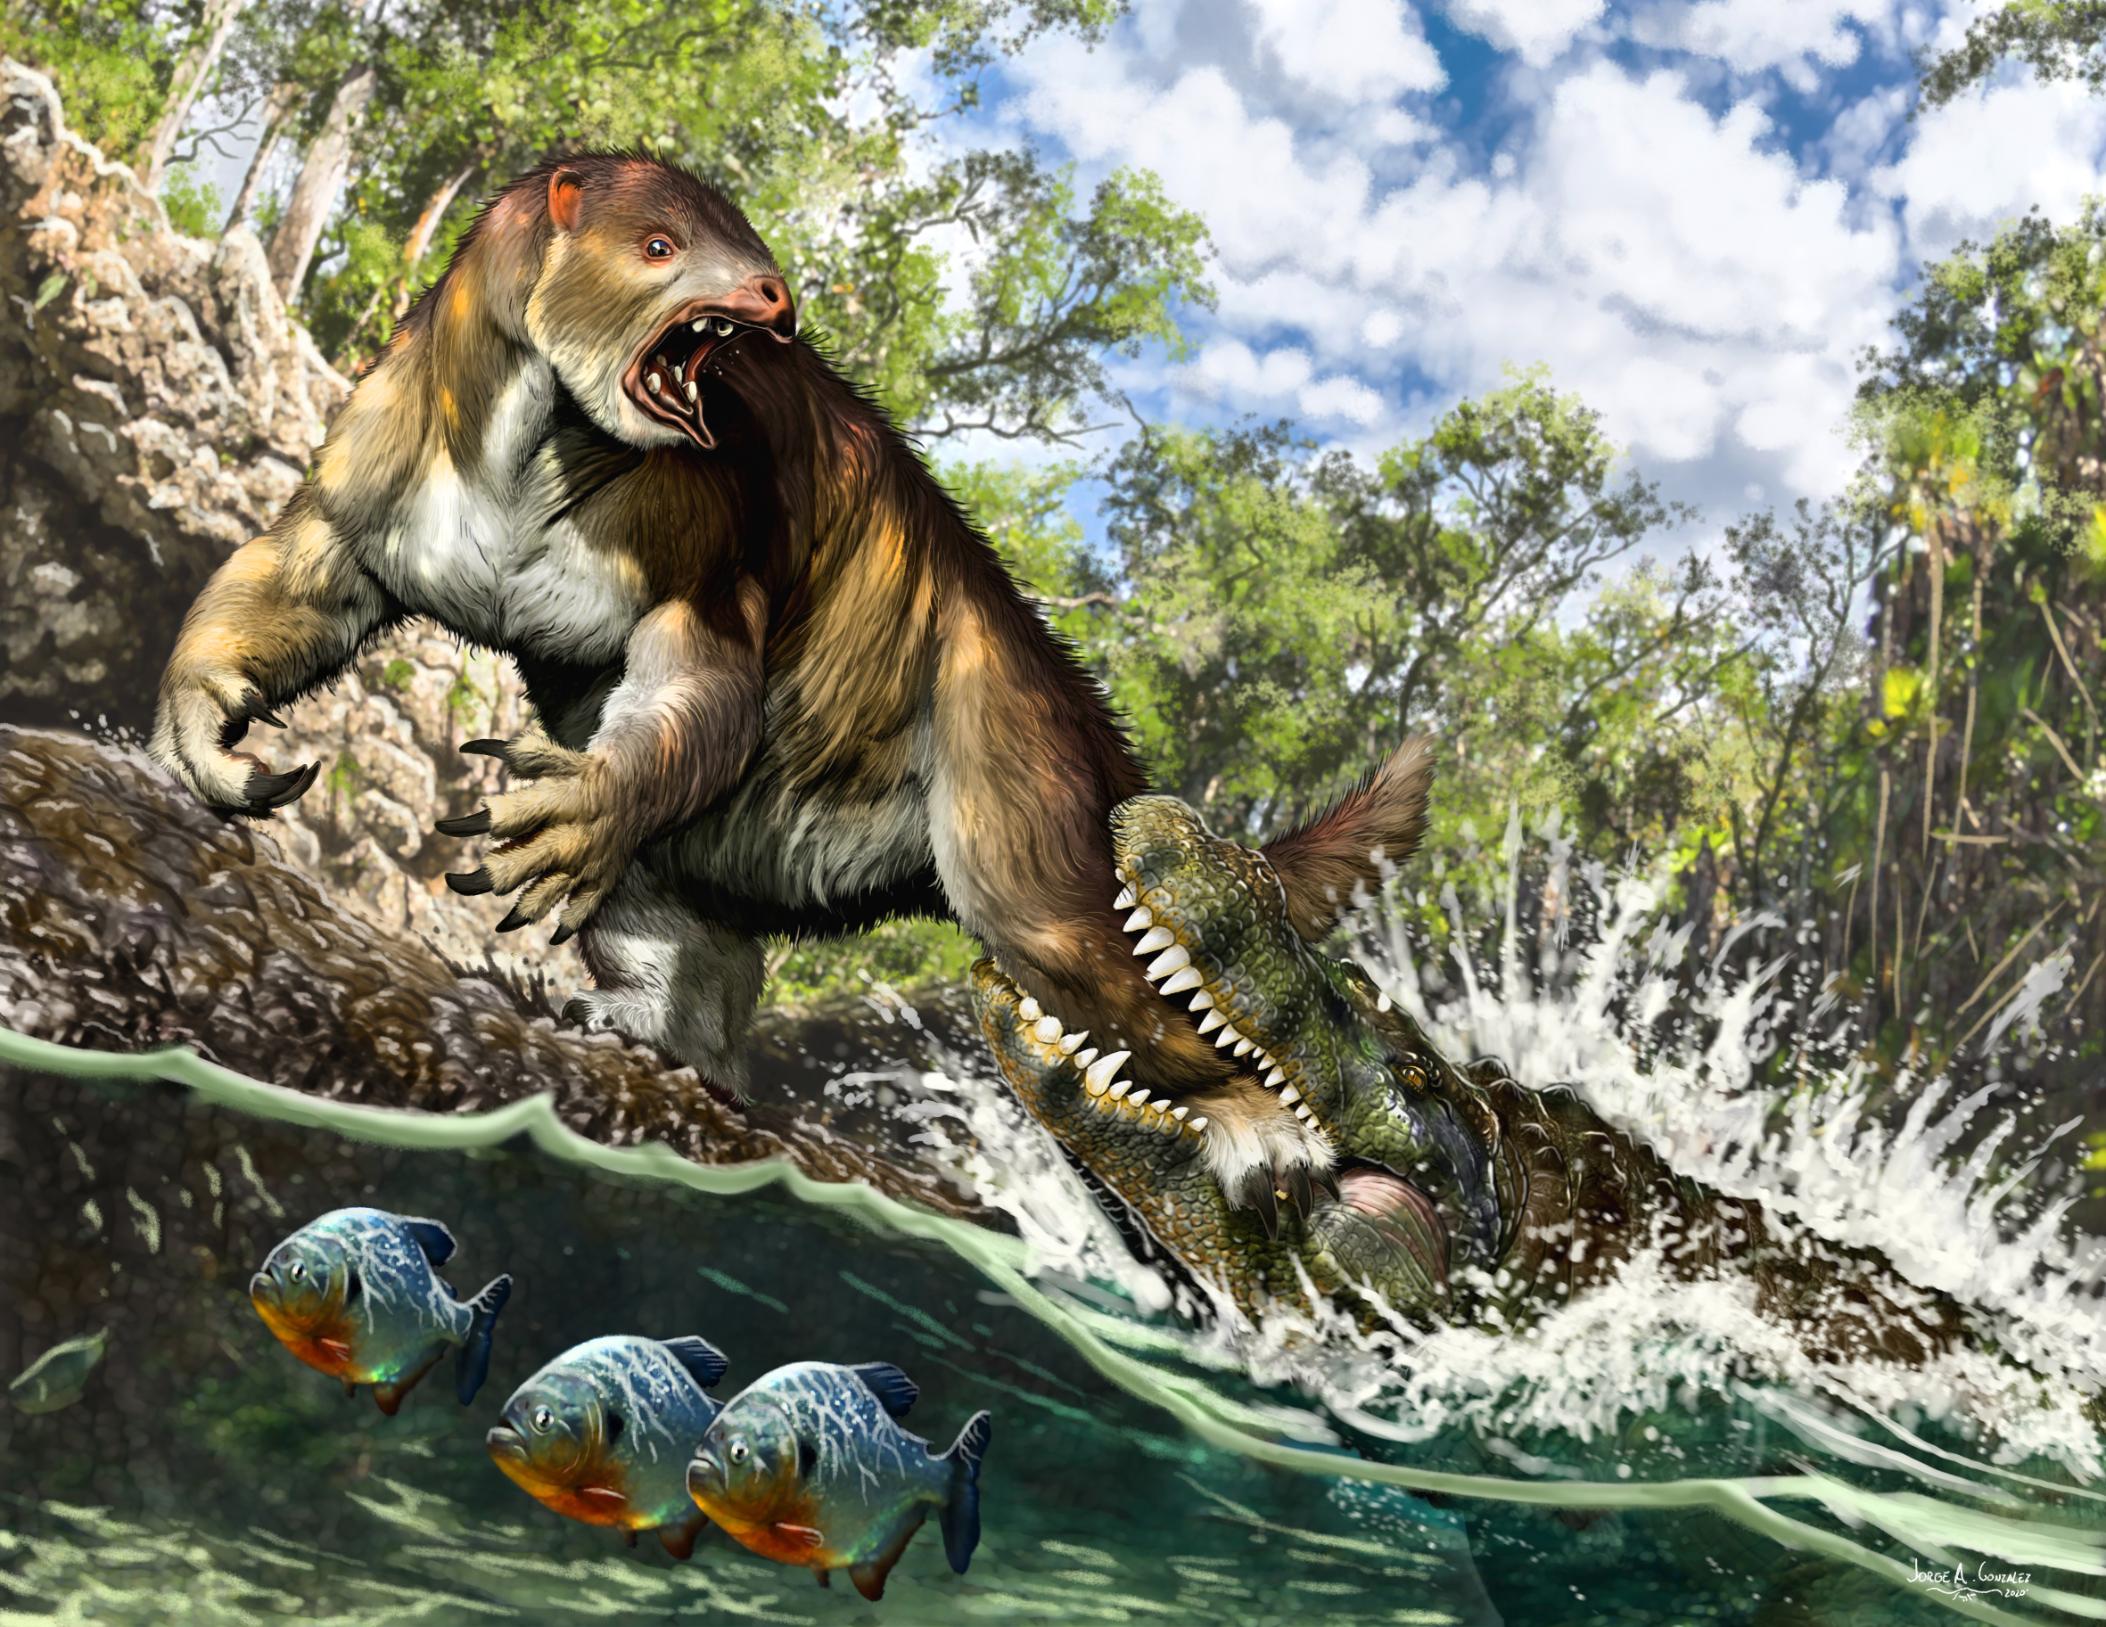 Tooth marks in 13-million-year-old fossil reveals 'strongest bite force  ever in the animal kingdom'